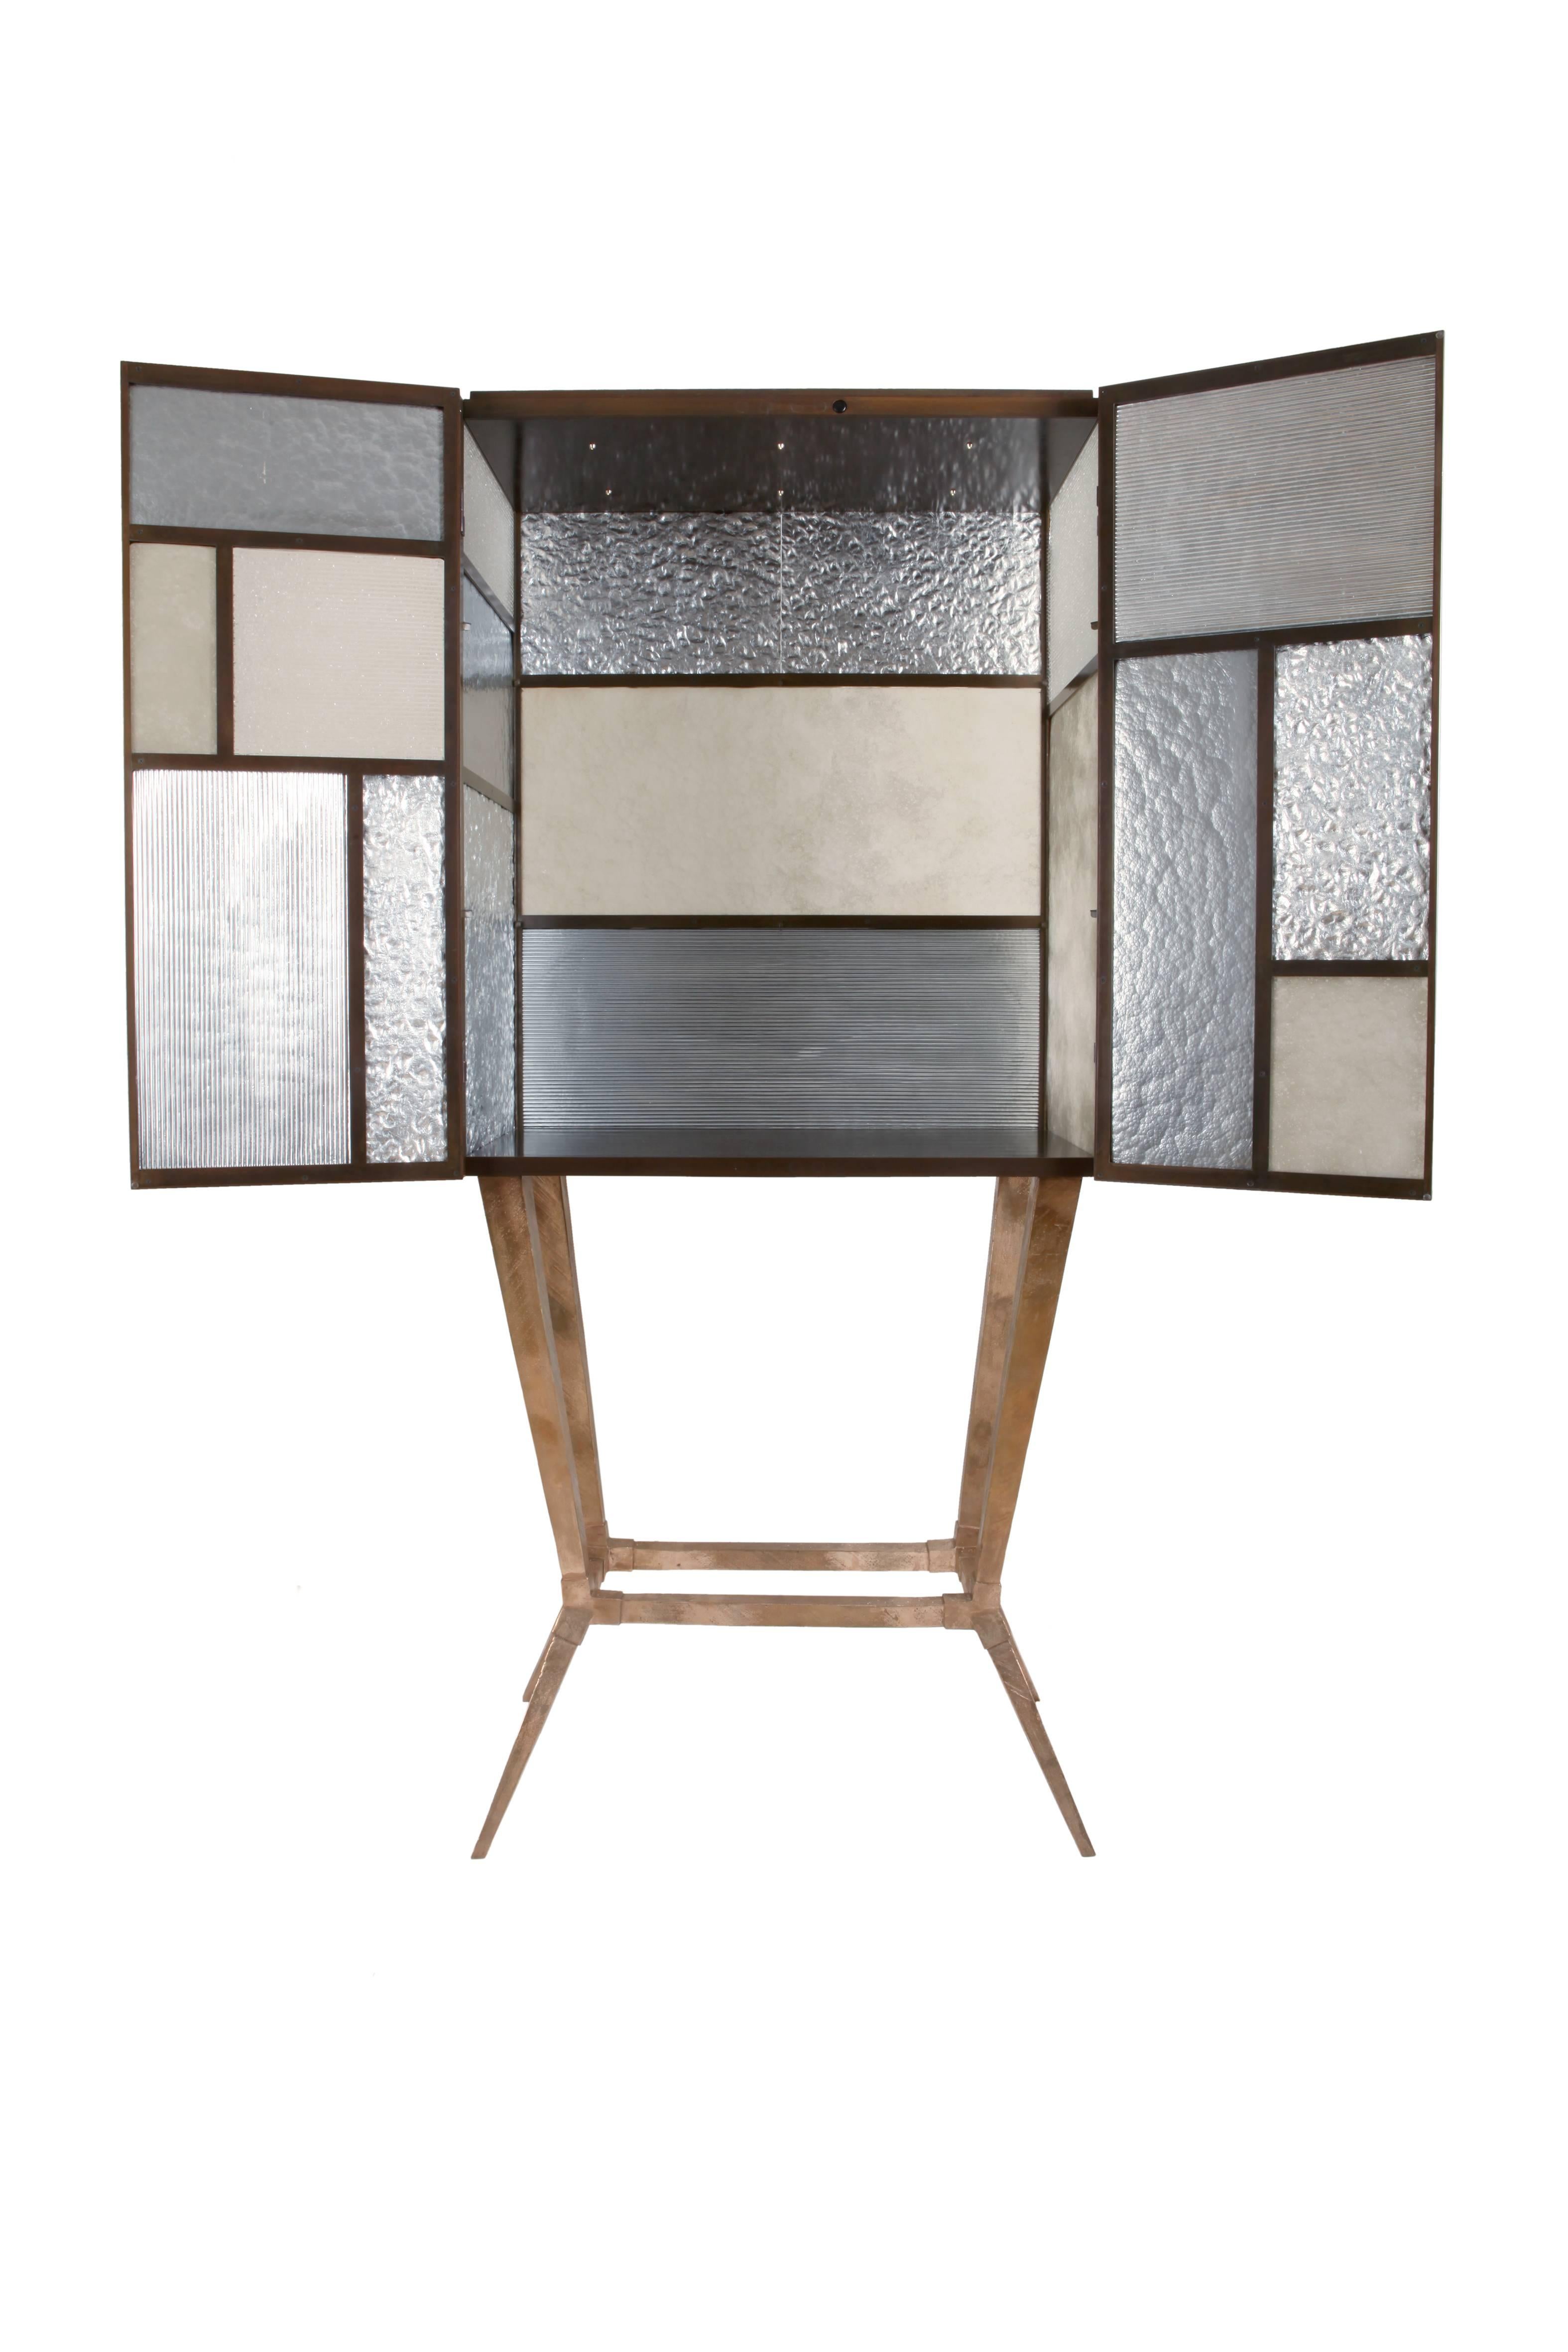 The tableau drinks cabinet is formed from 17 individually hand floated pieces of Murano glass, set in a patinated steel frame on top of a cast bronze base in it's natural form.
The doors are held in place with hidden magnets, and the inside of the